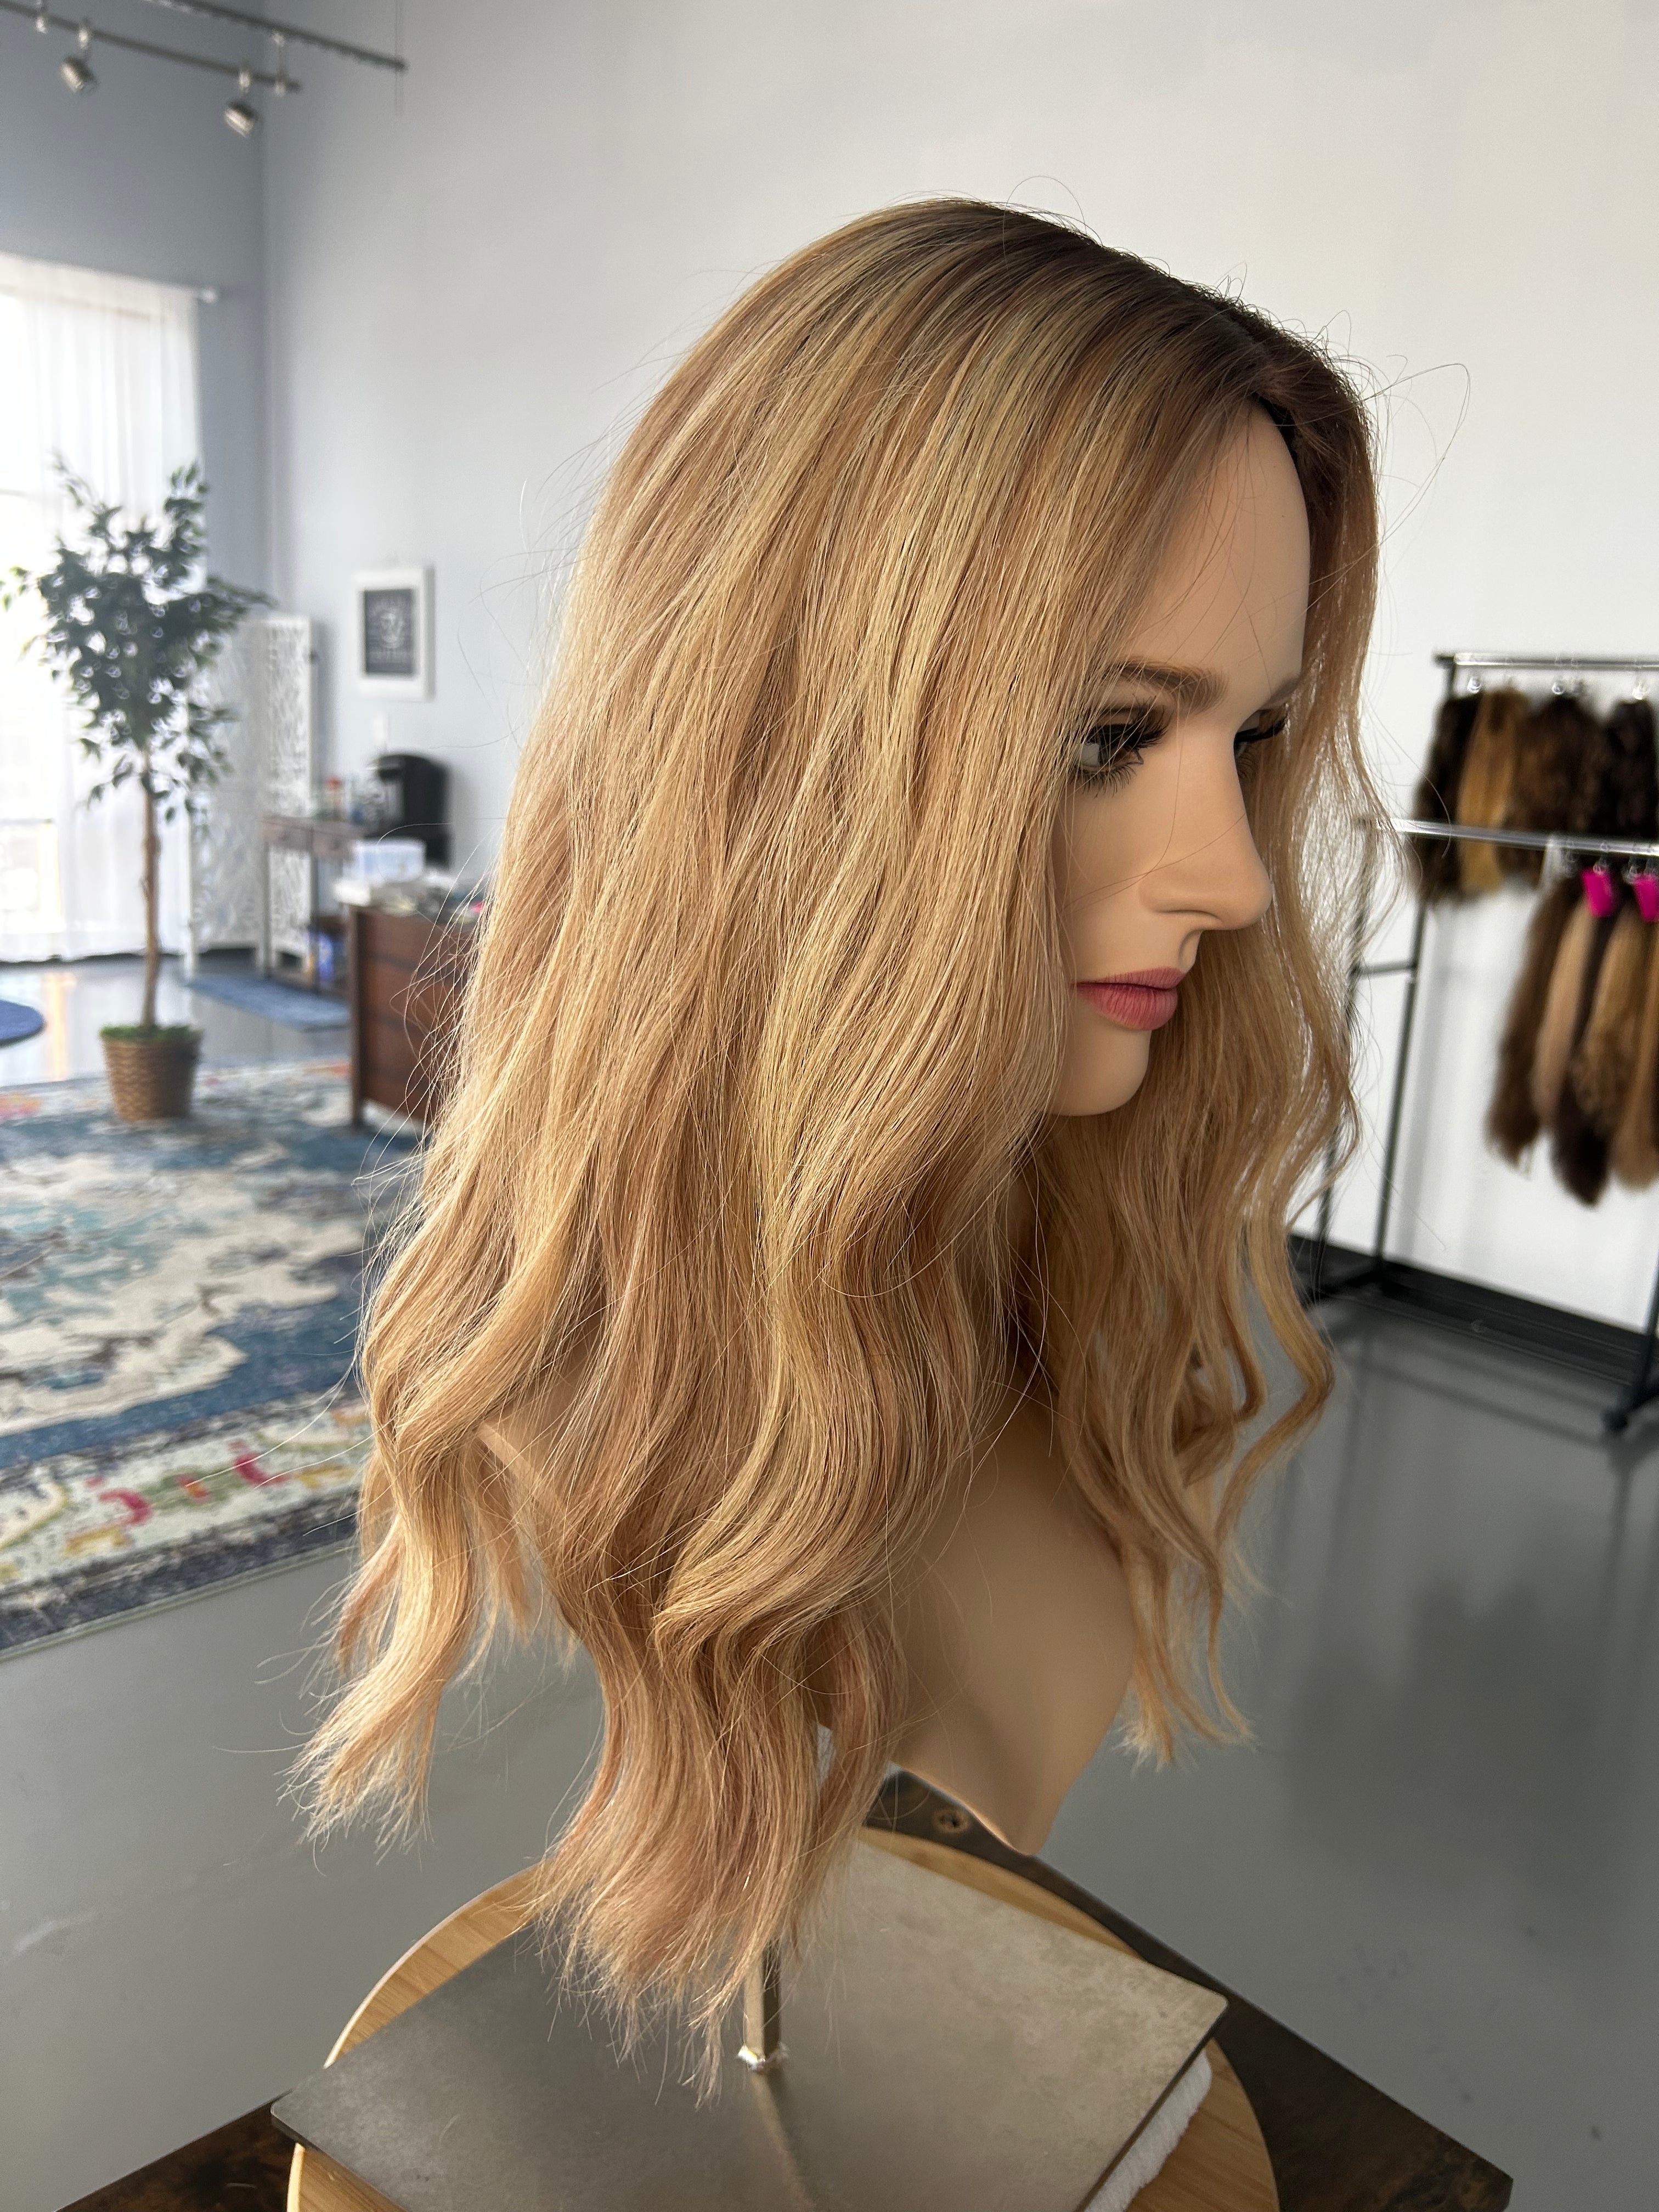 Topper- Specialty Color Rooted Dimensional Sandy Blonde, 9x9, 18-20"